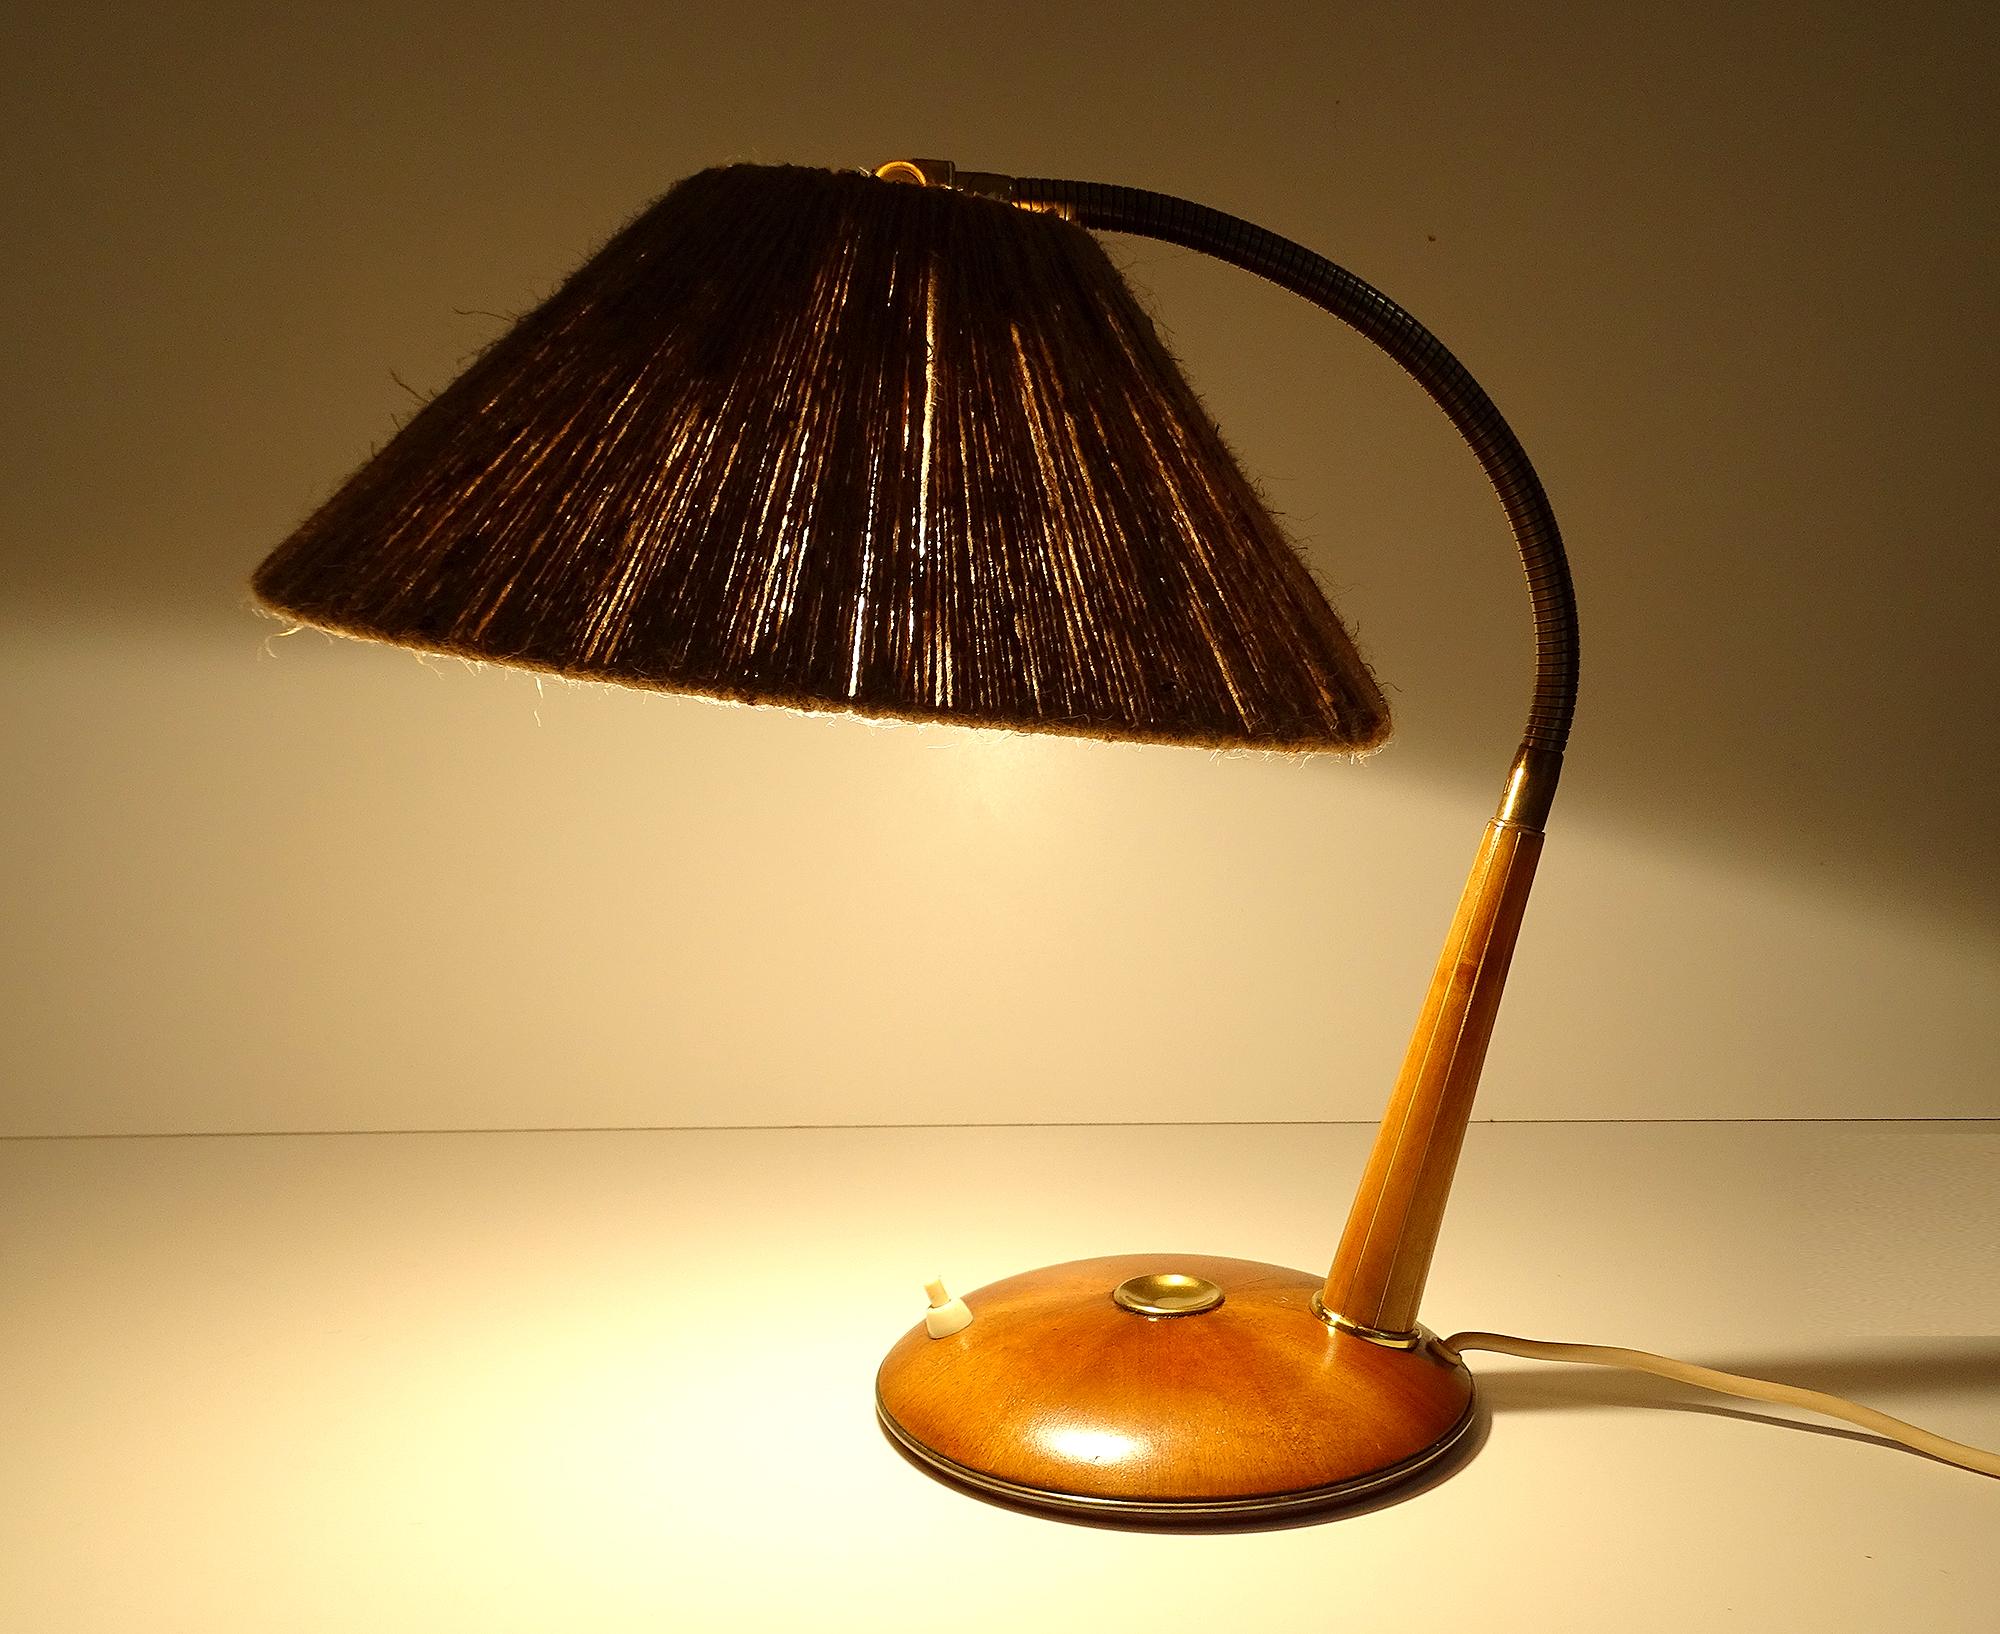 Midcentury Danish modern  table or desk lamp manufactured by the swiss-german Temde Manufacture, this is the model nr 31, featuring a base with a star shape marquetry of wood veener with a central knoby brass button, the first section of the stem